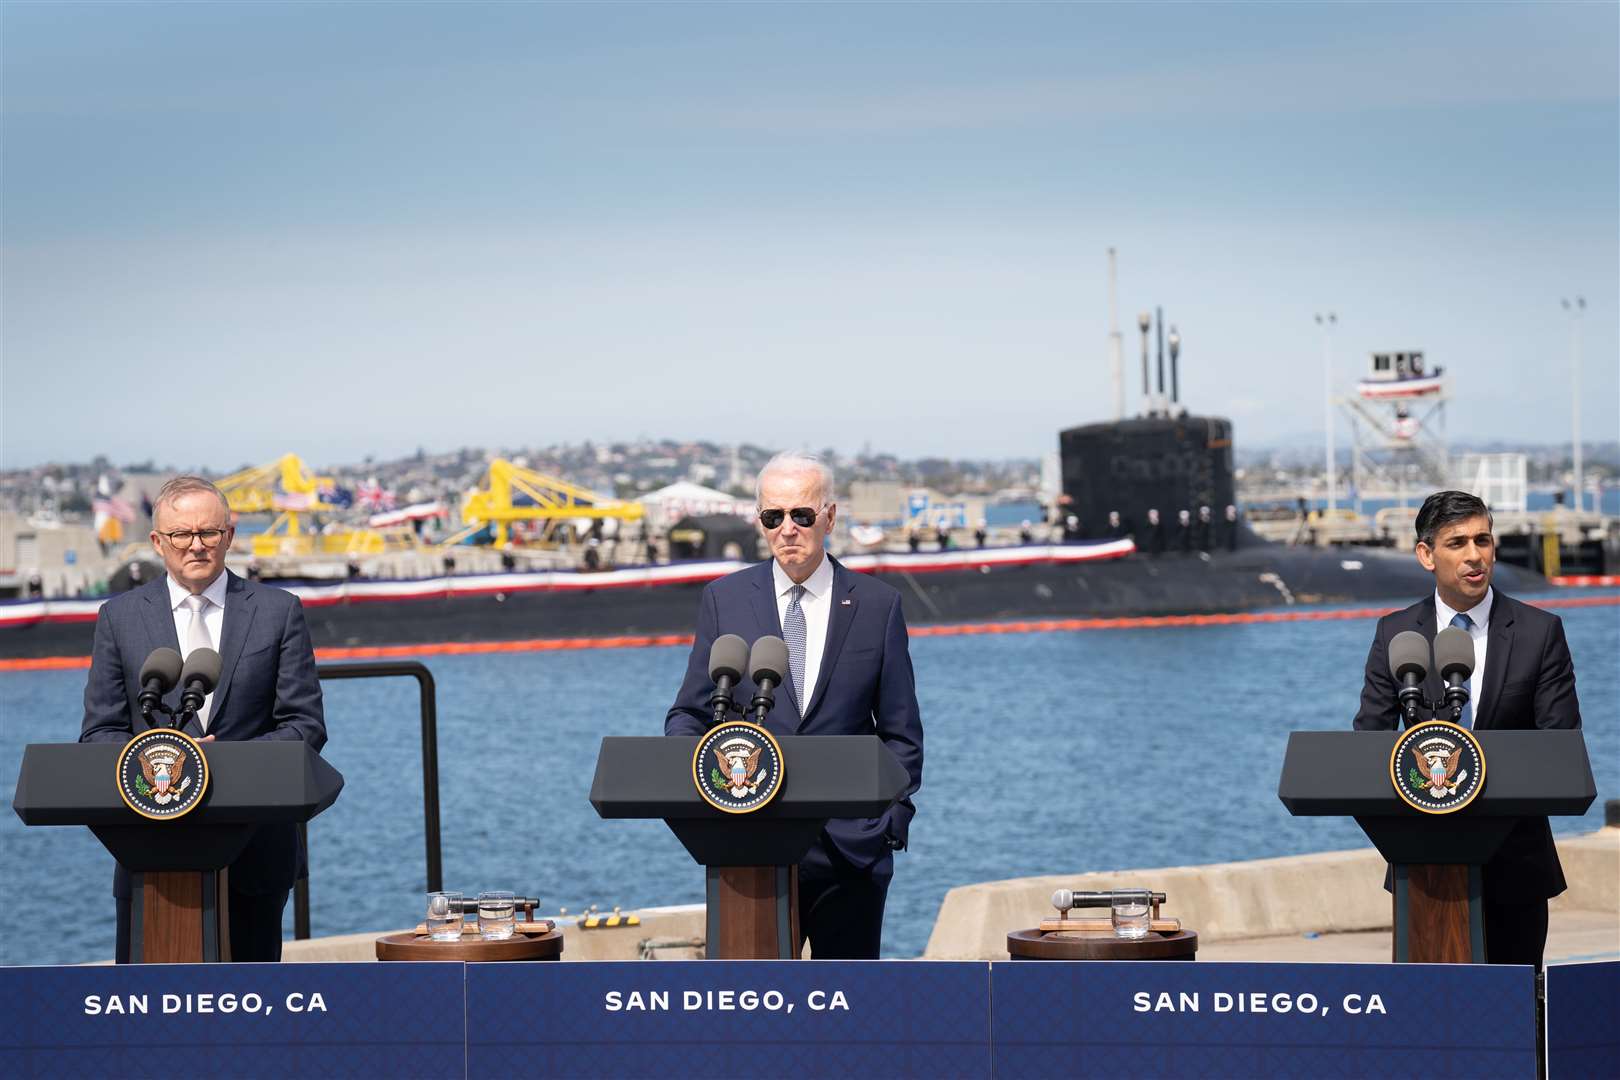 Prime Minister Rishi Sunak during a press conference with US President Joe Biden and Prime Minister of Australia Anthony Albanese at Point Loma naval base in San Diego, US (Stefan Rousseau/PA)